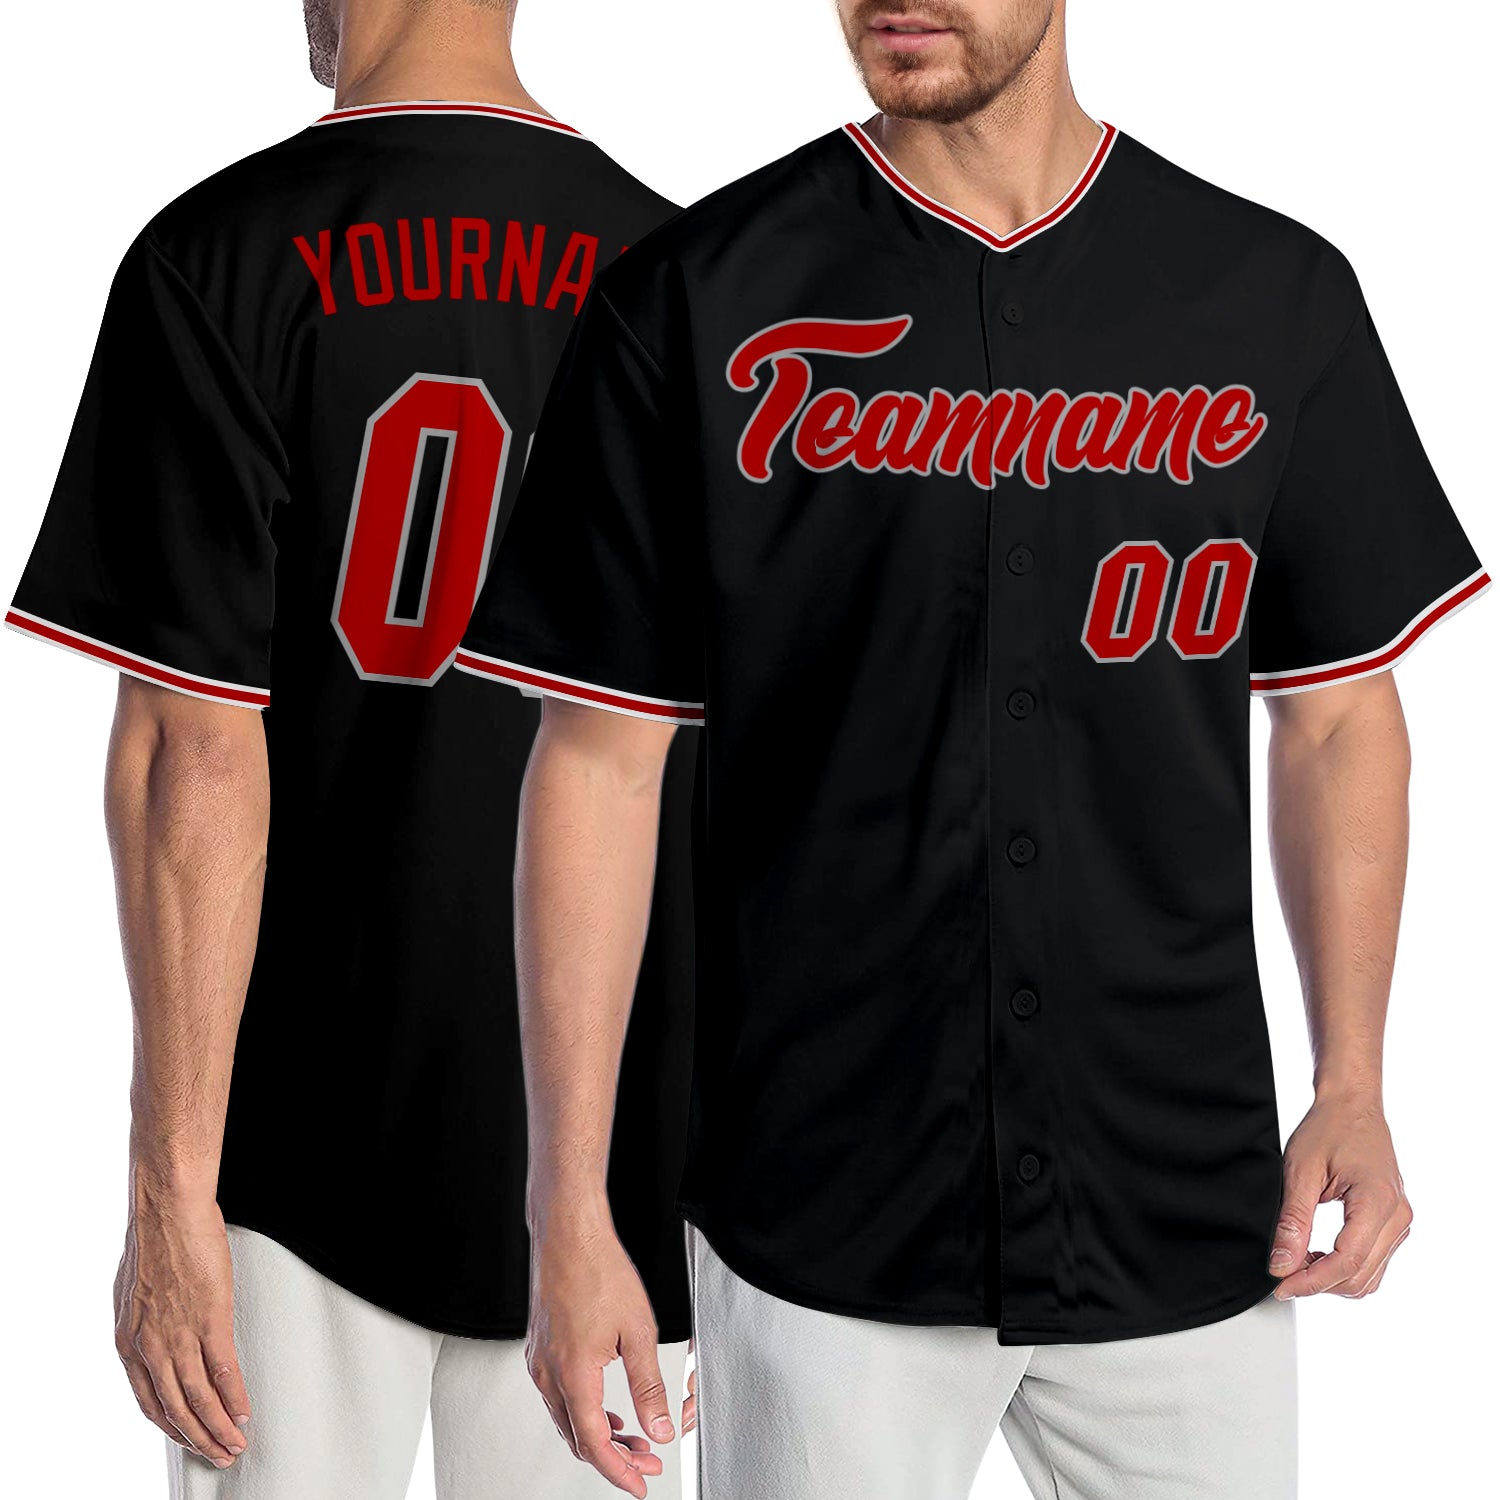 Custom Red Red-Gray Authentic Baseball Jersey Discount